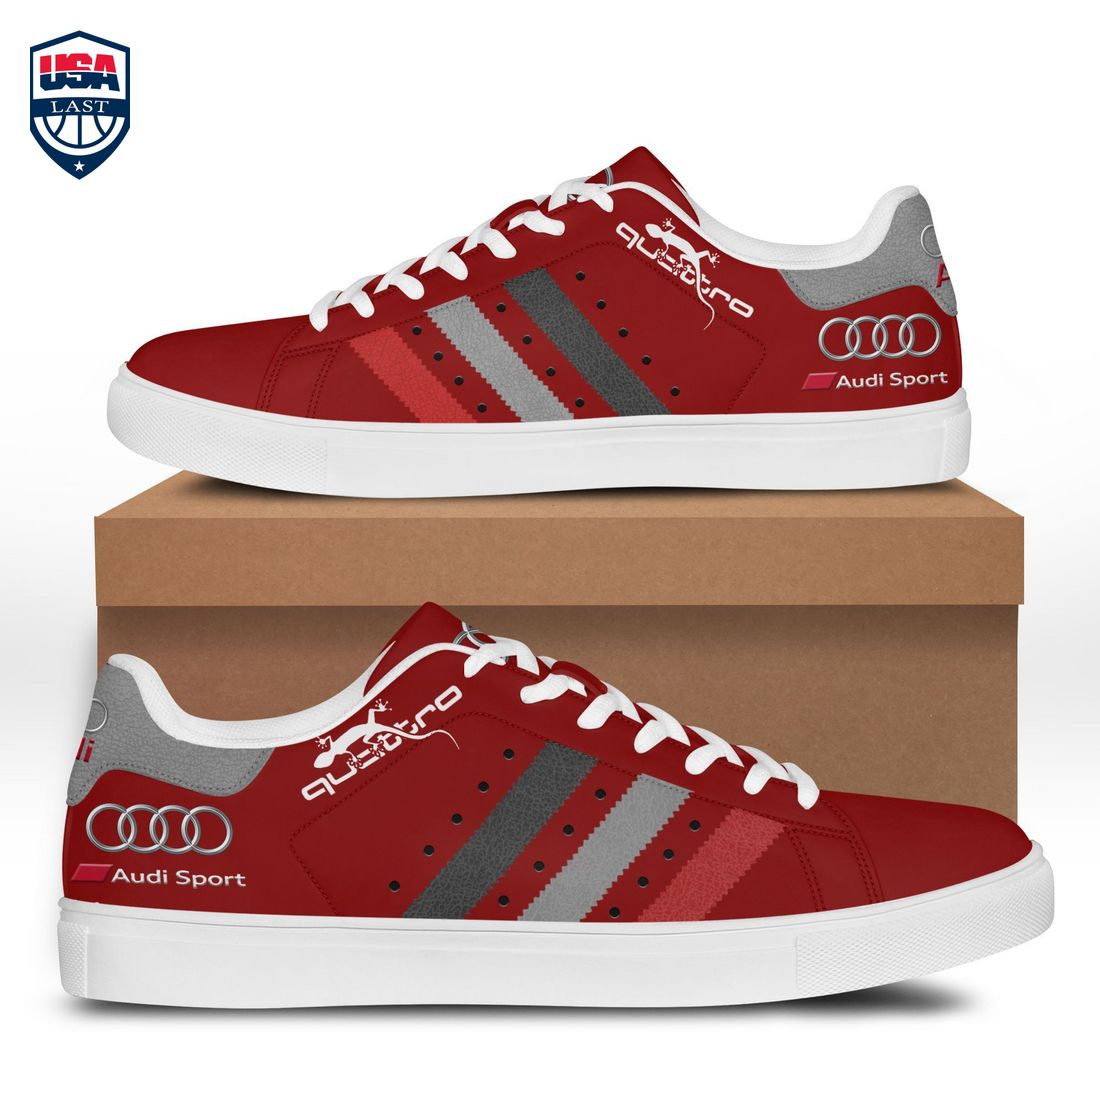 Audi Sport Quattro Red Stan Smith Low Top Shoes